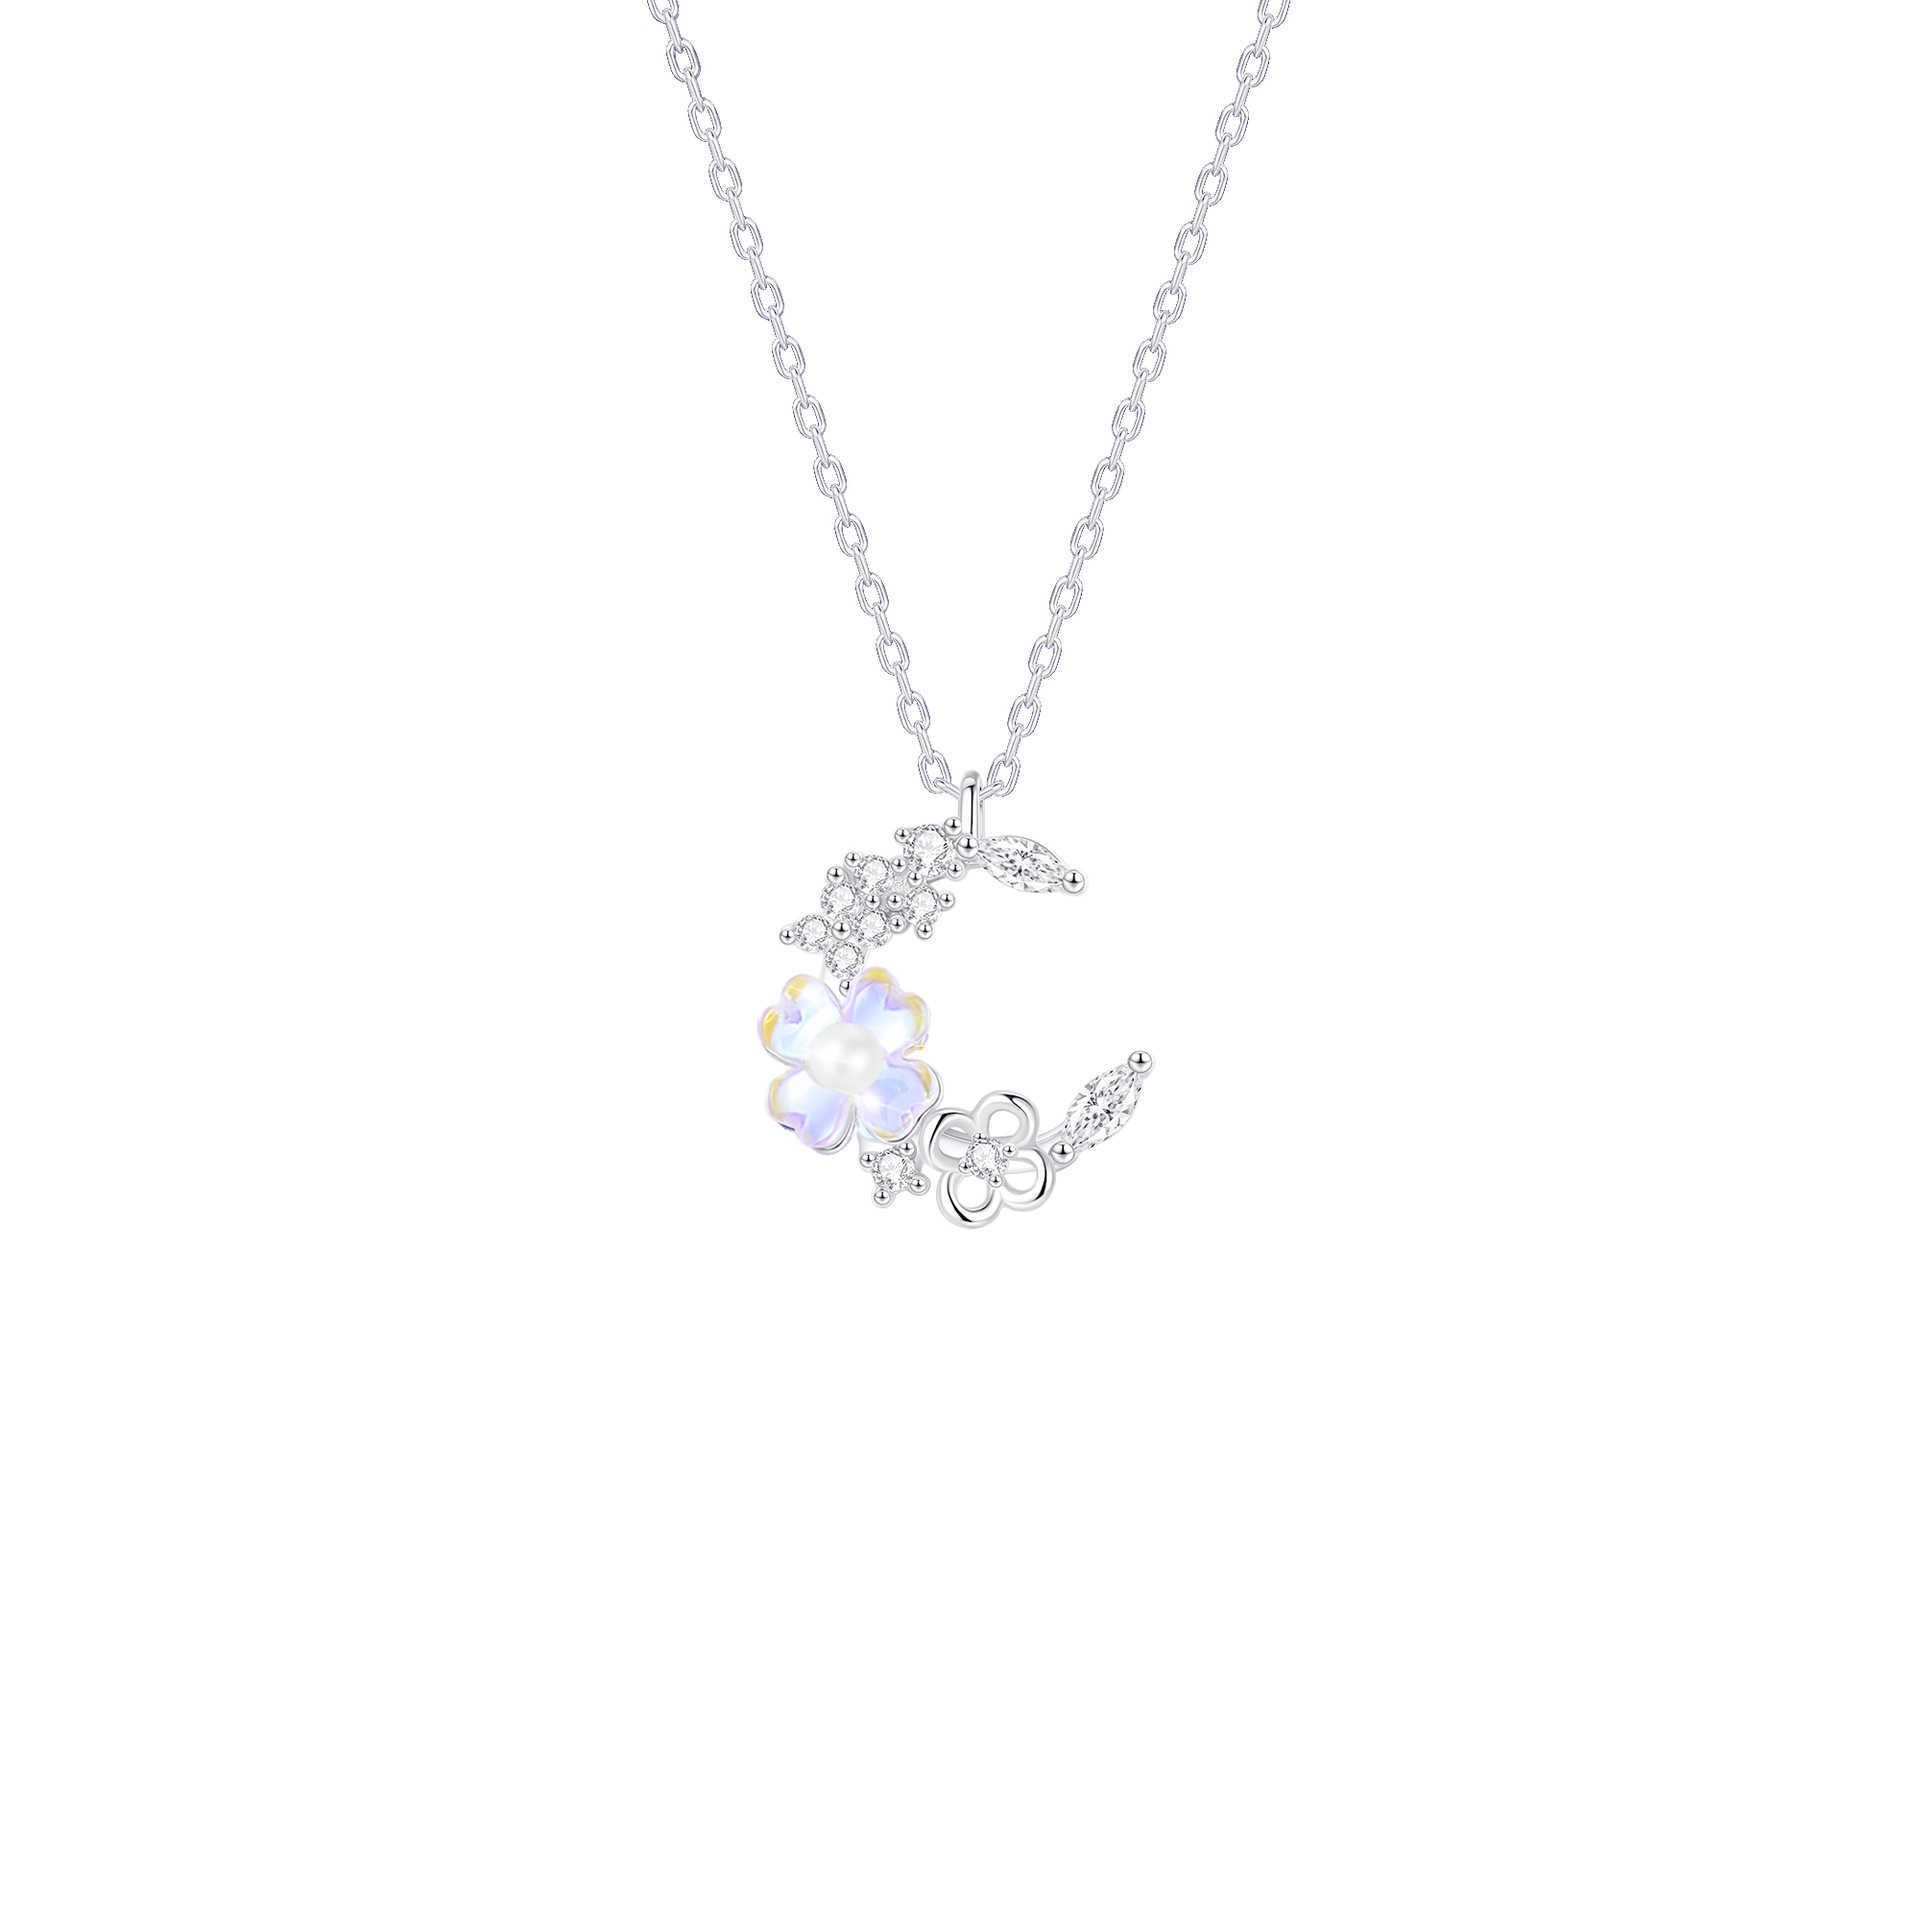 W699 Lucky Moonlight Necklace-925 Silver